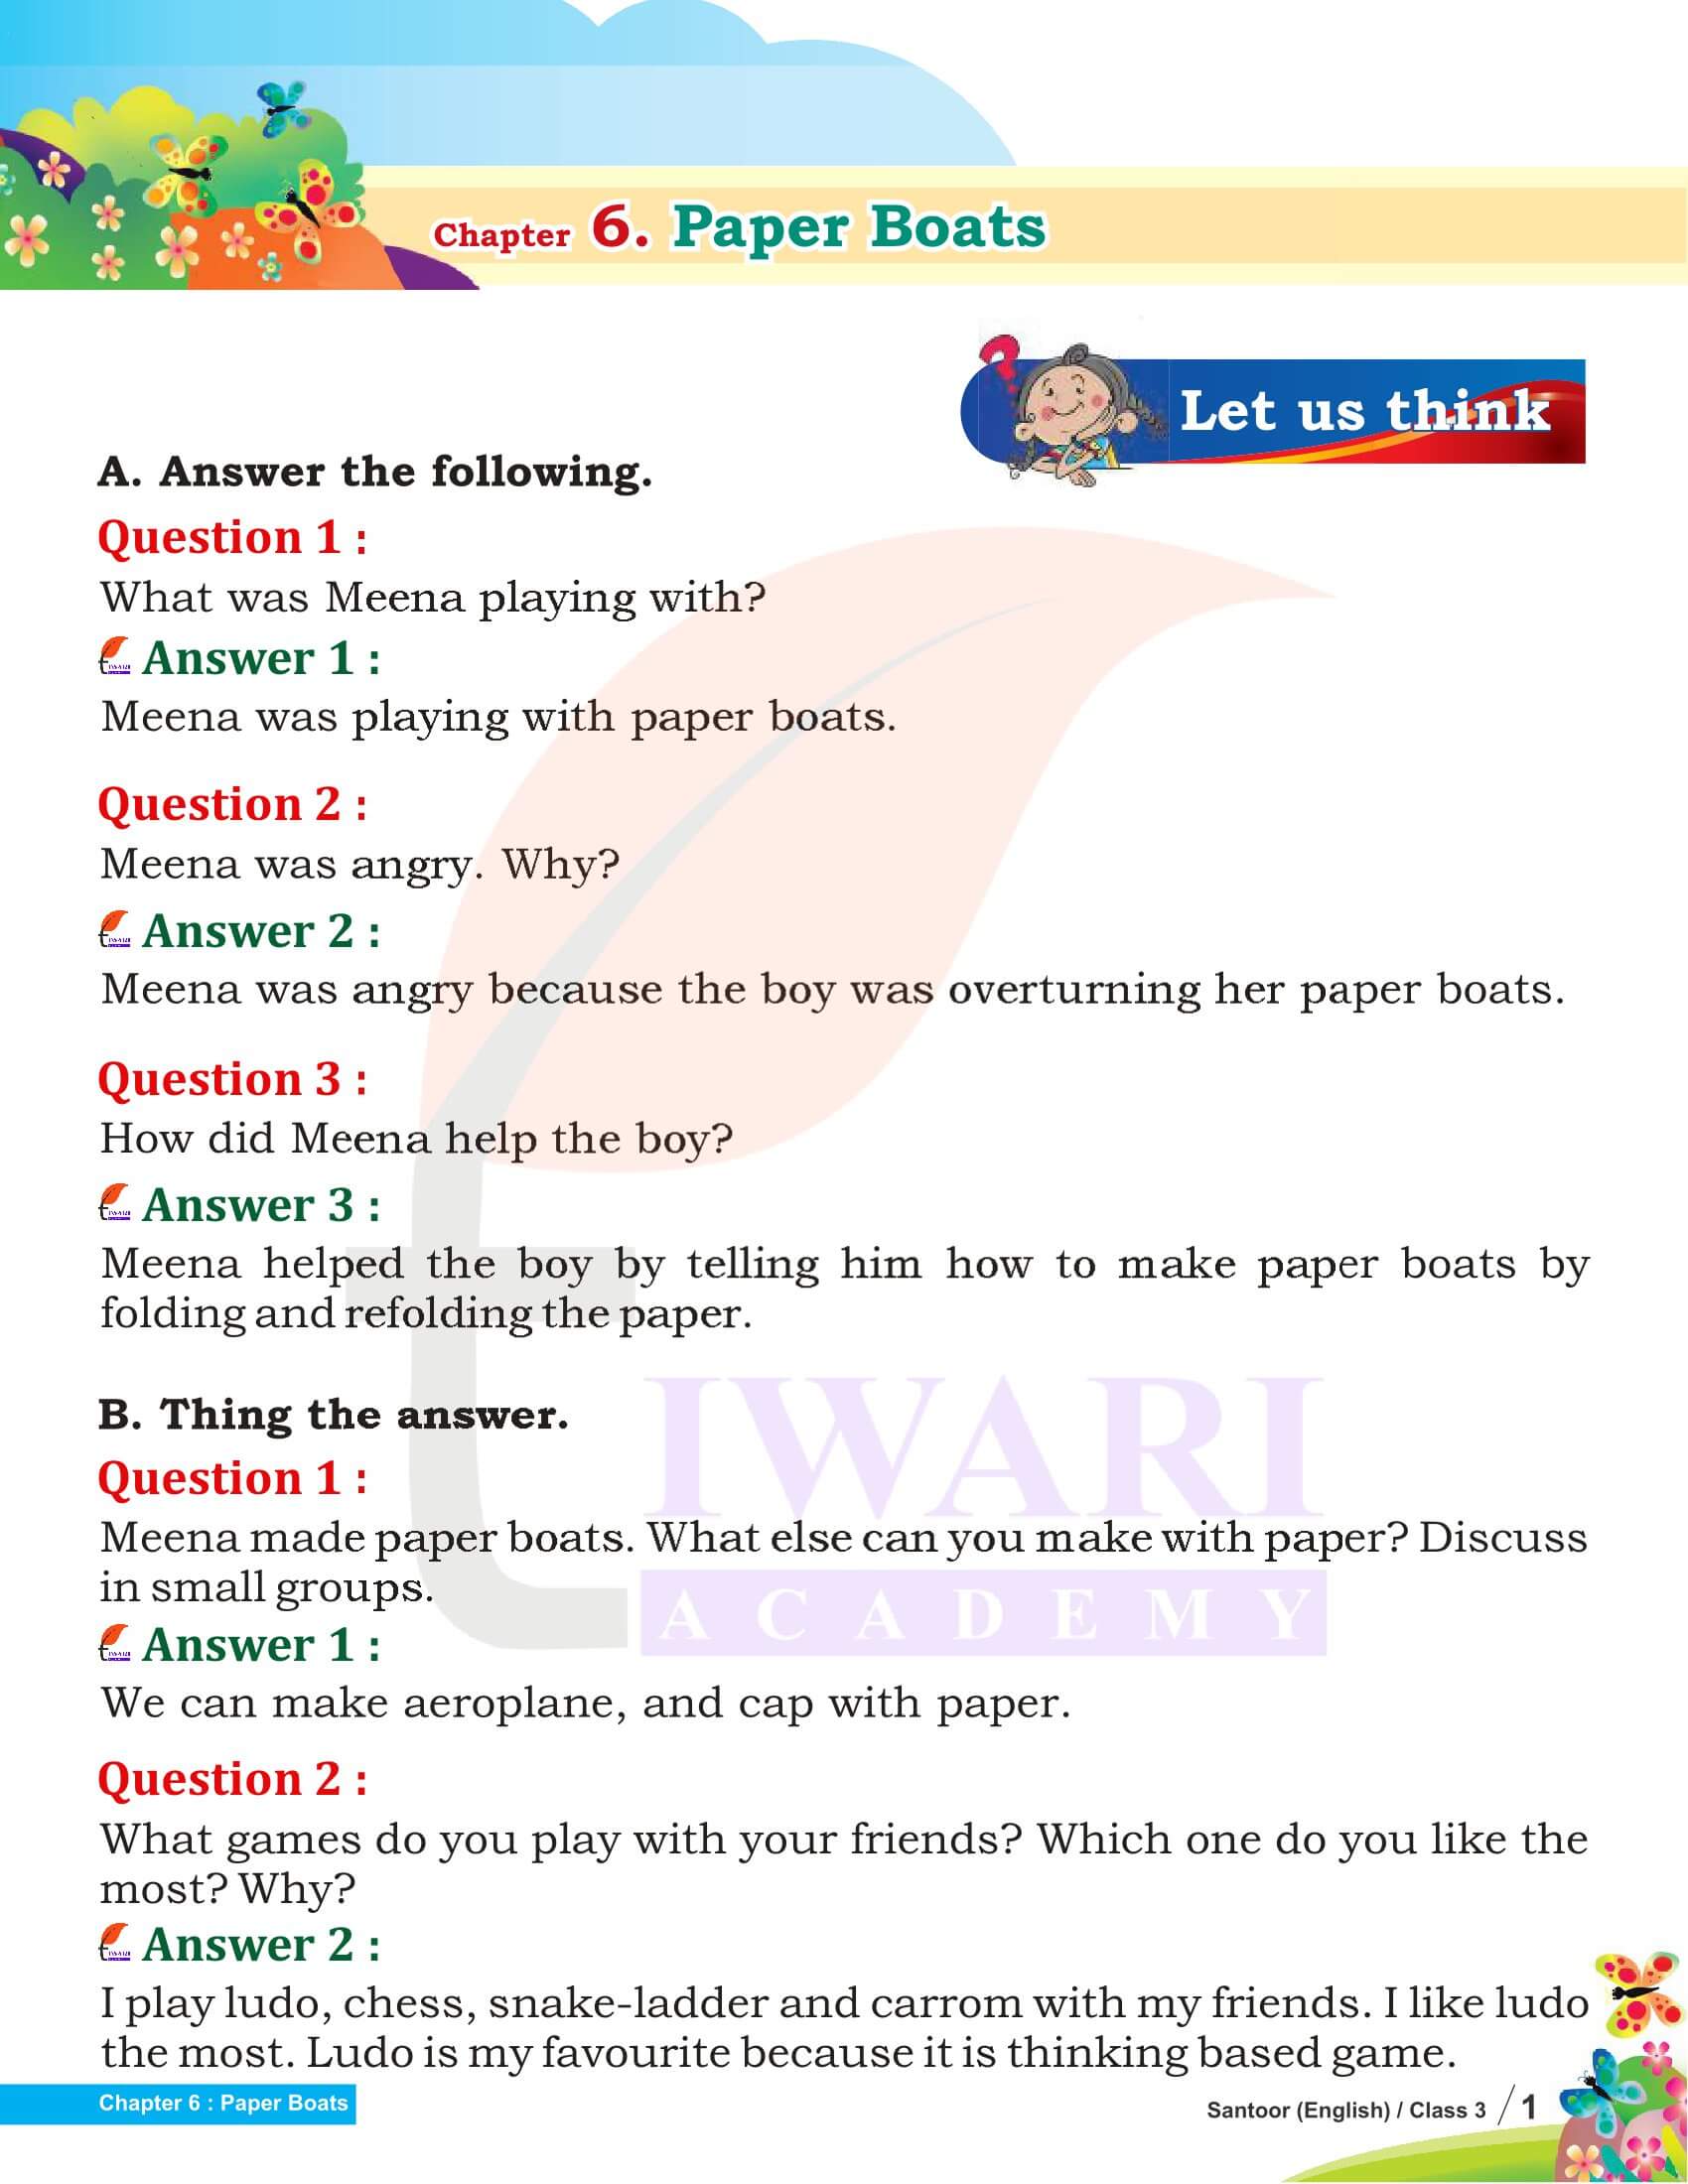 NCERT Solutions for Class 3 English Santoor Chapter 6 Paper Boats Answers